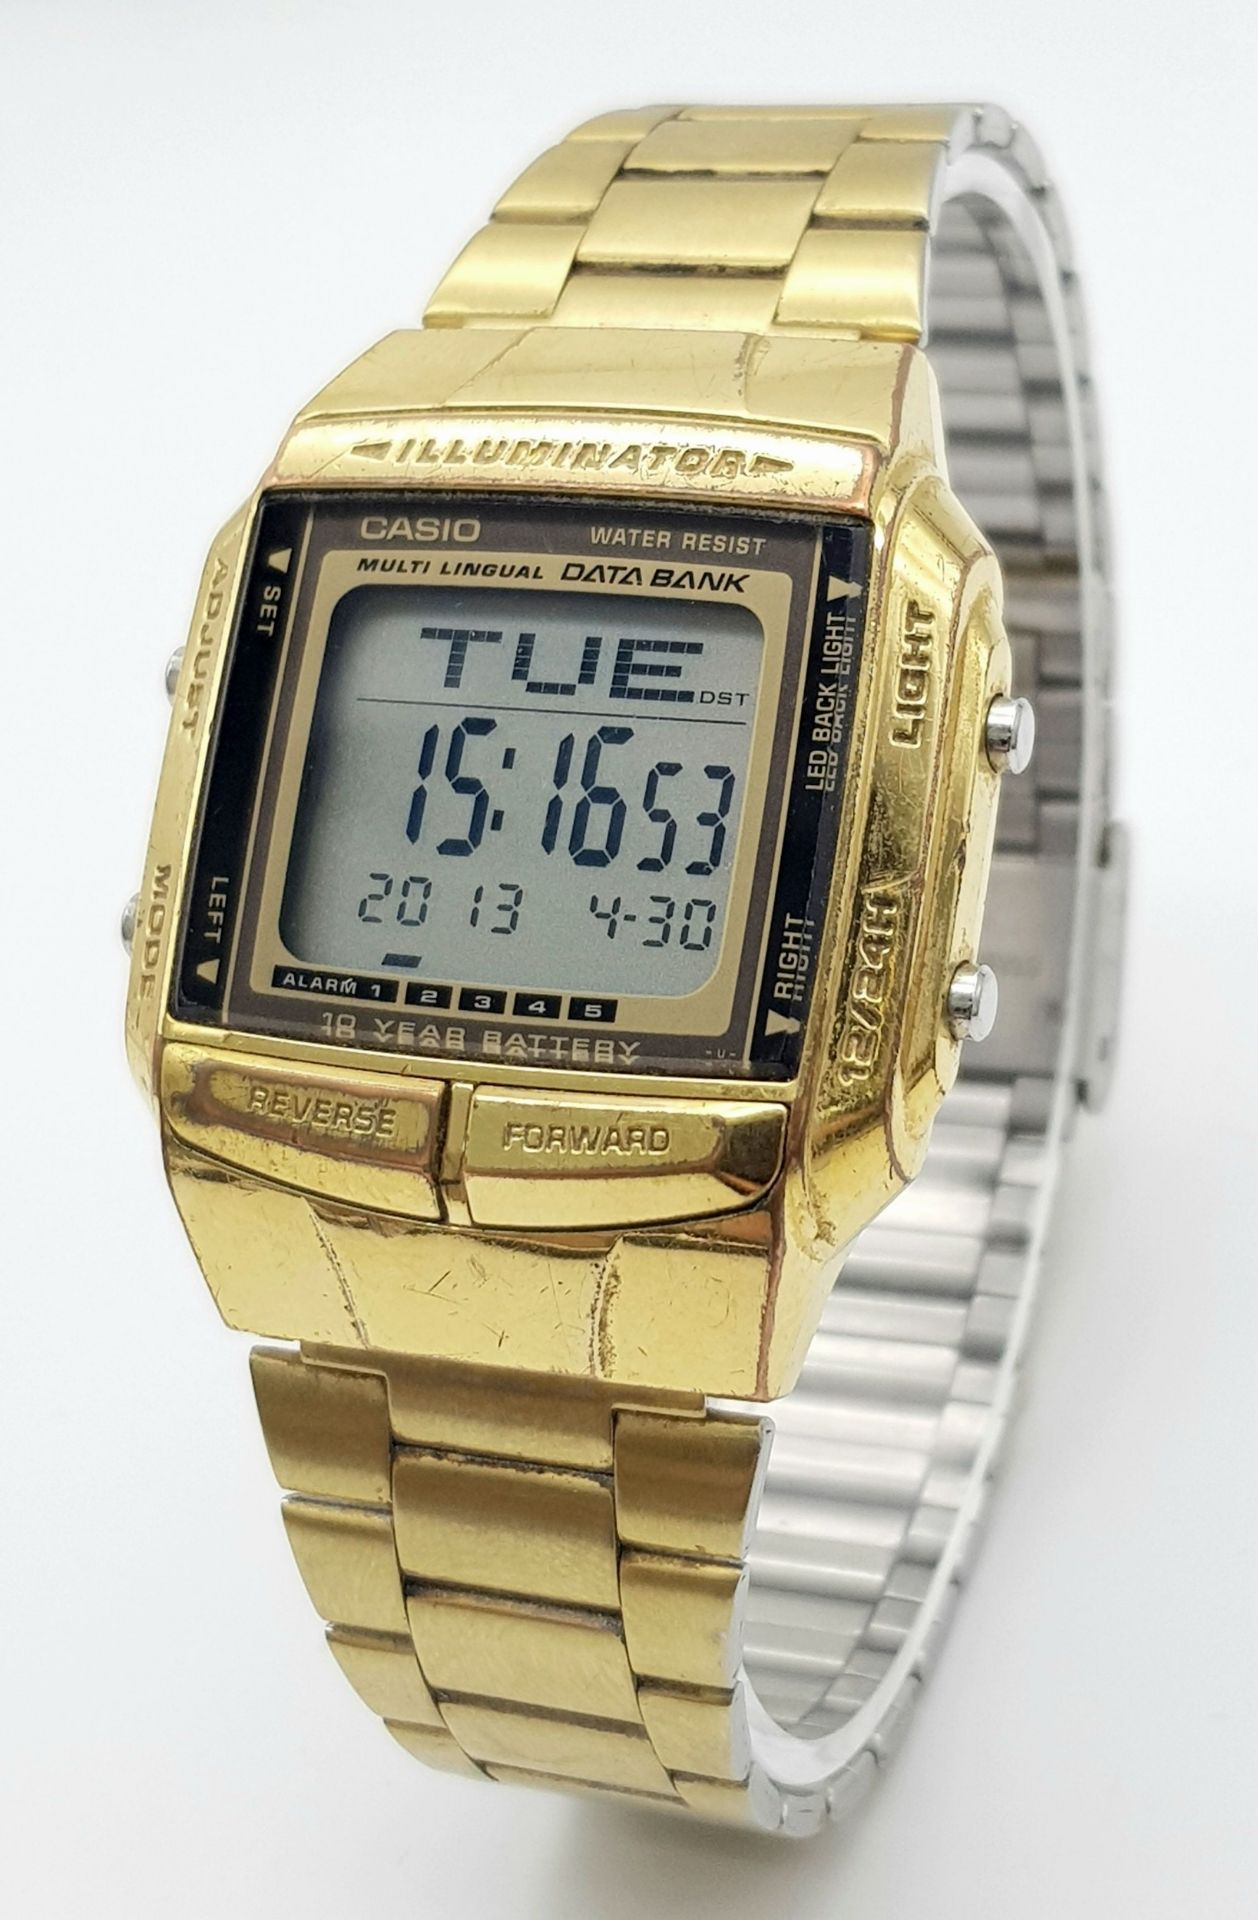 A Classic Casio Multi Lingual Data Bank Gents Quartz Watch. Gilded bracelet and case - 36mm. In good